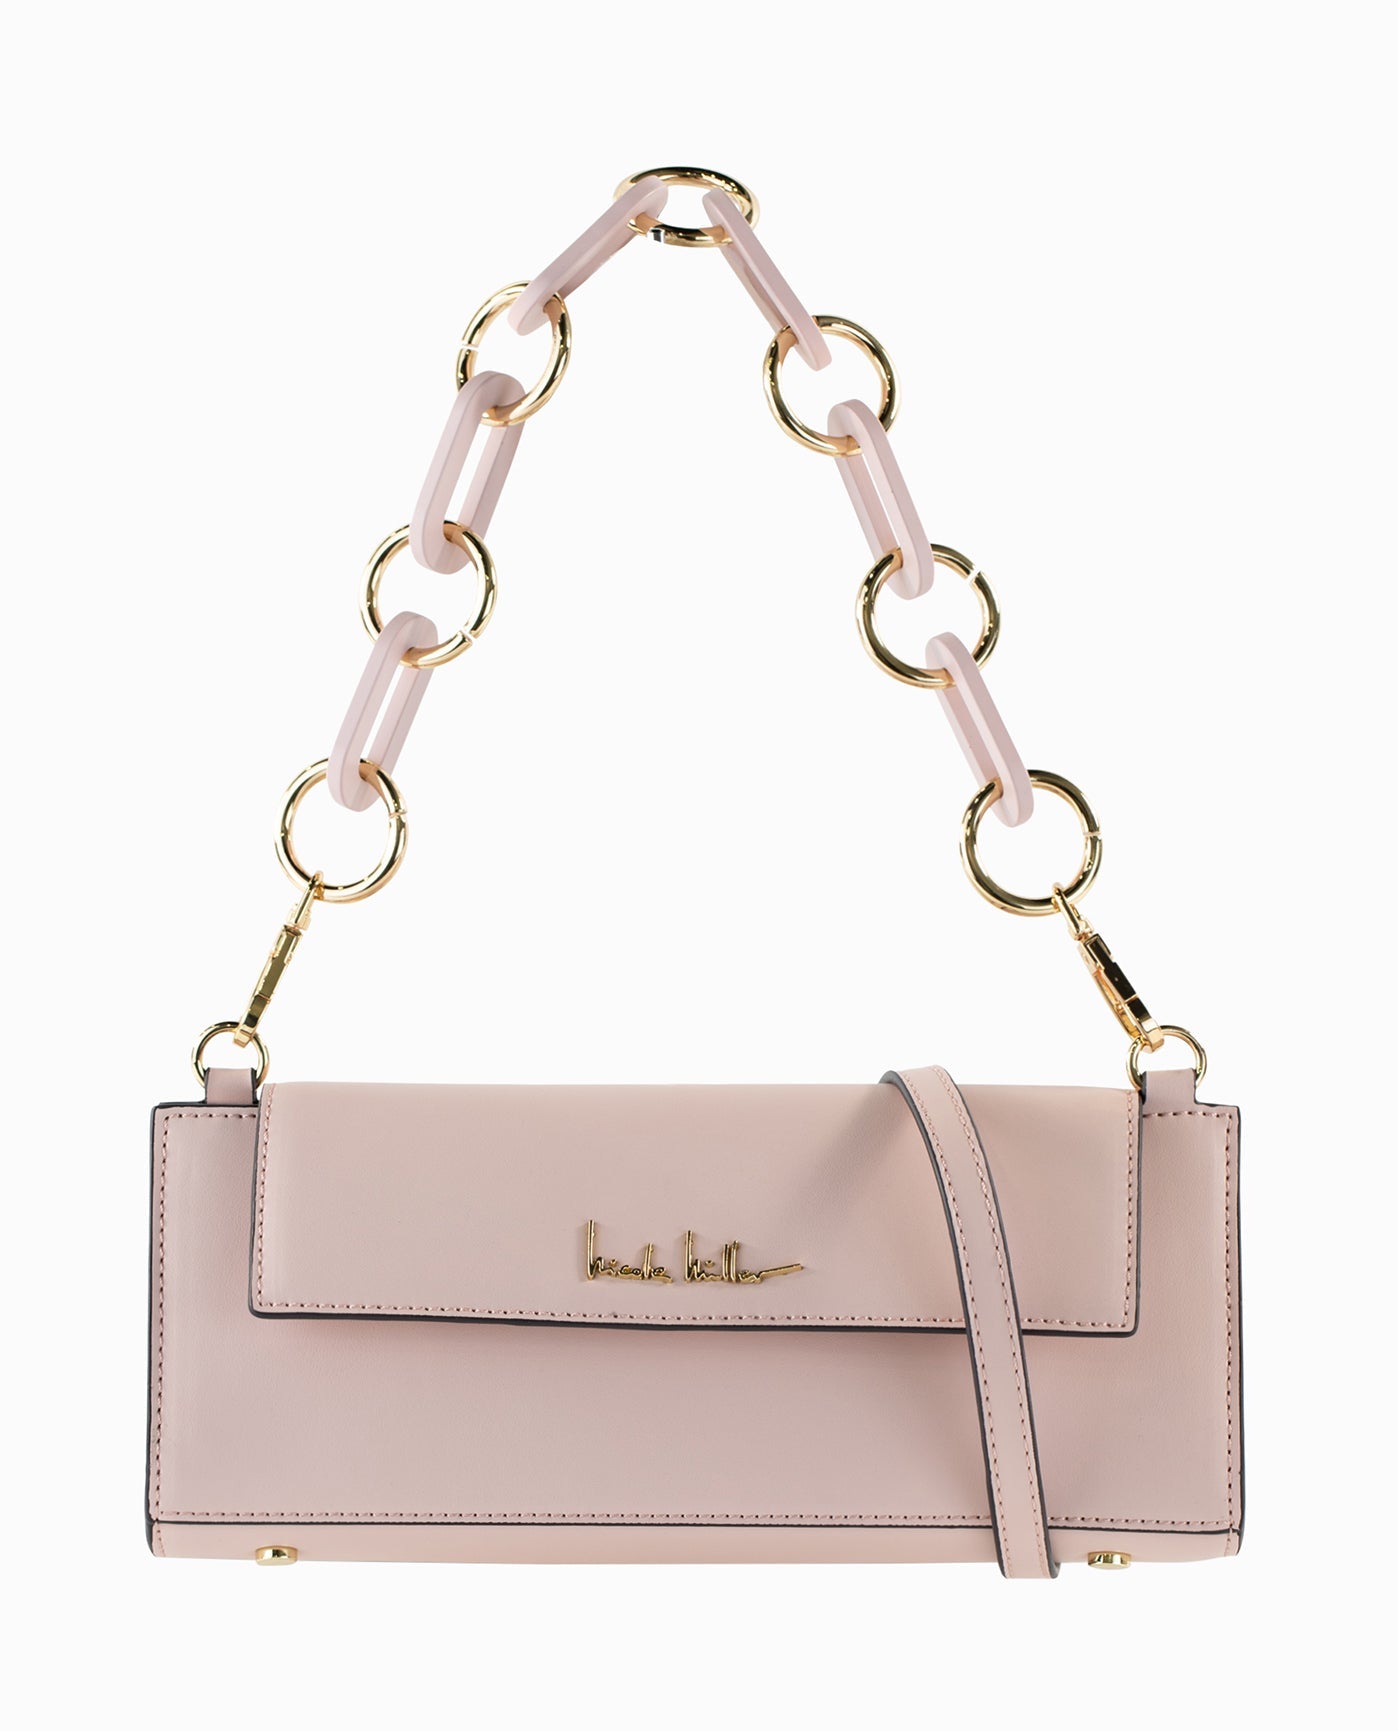 crossbody bag with pink